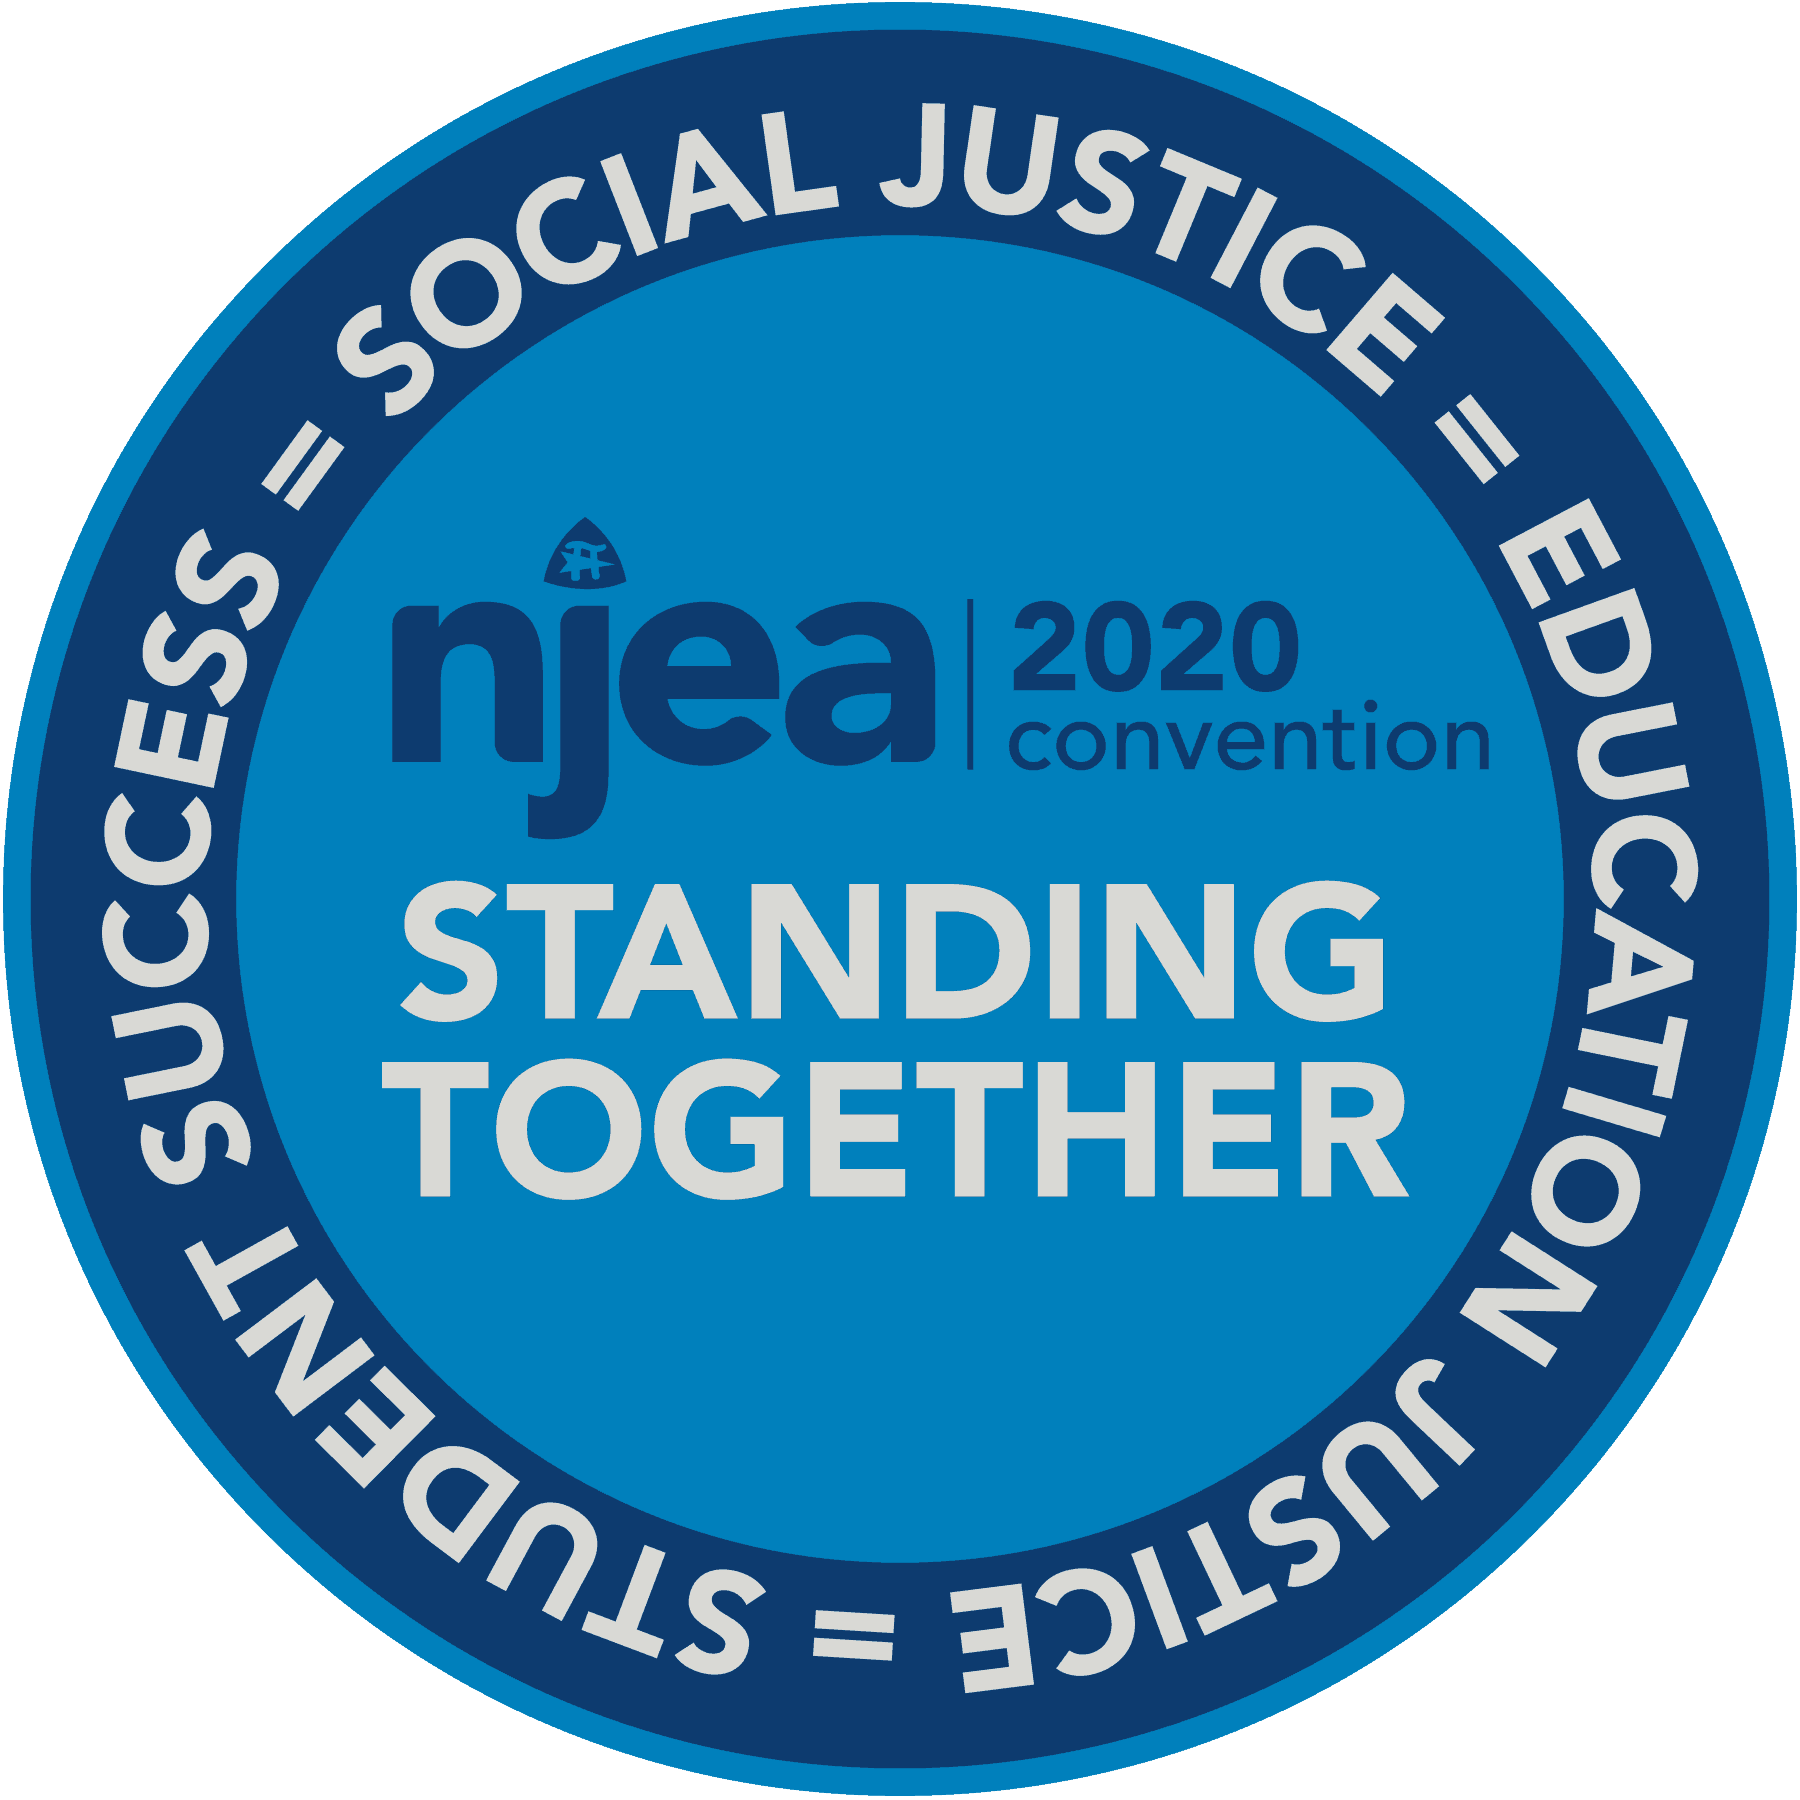 Interested in presenting at the 2020 NJEA Convention? NJEA Convention